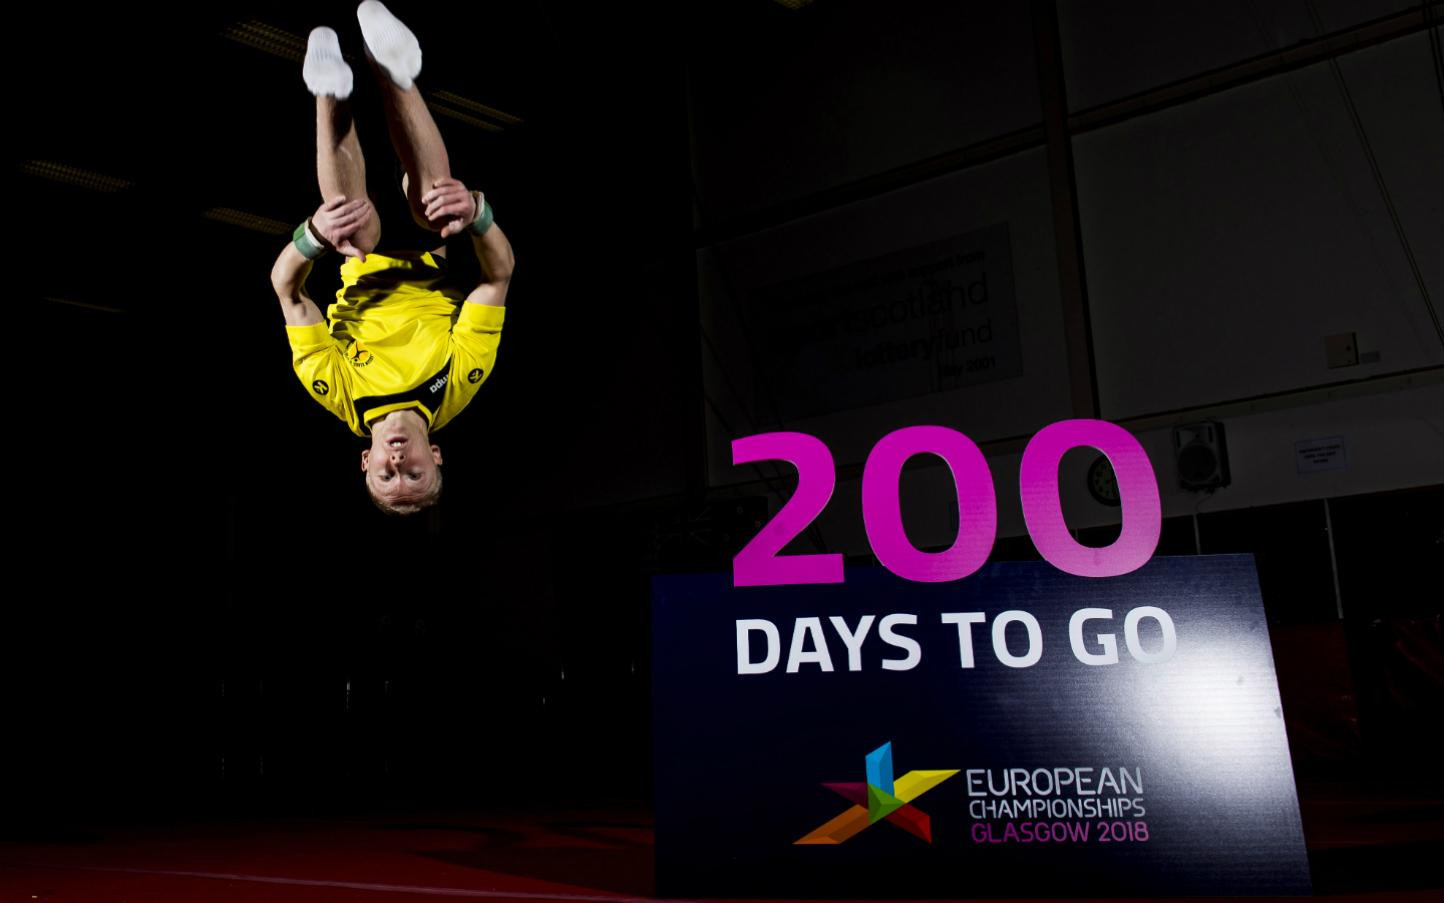 The Glasgow 2018 European Championships are due to take place from August 2 to 12 ©Glasgow 2018